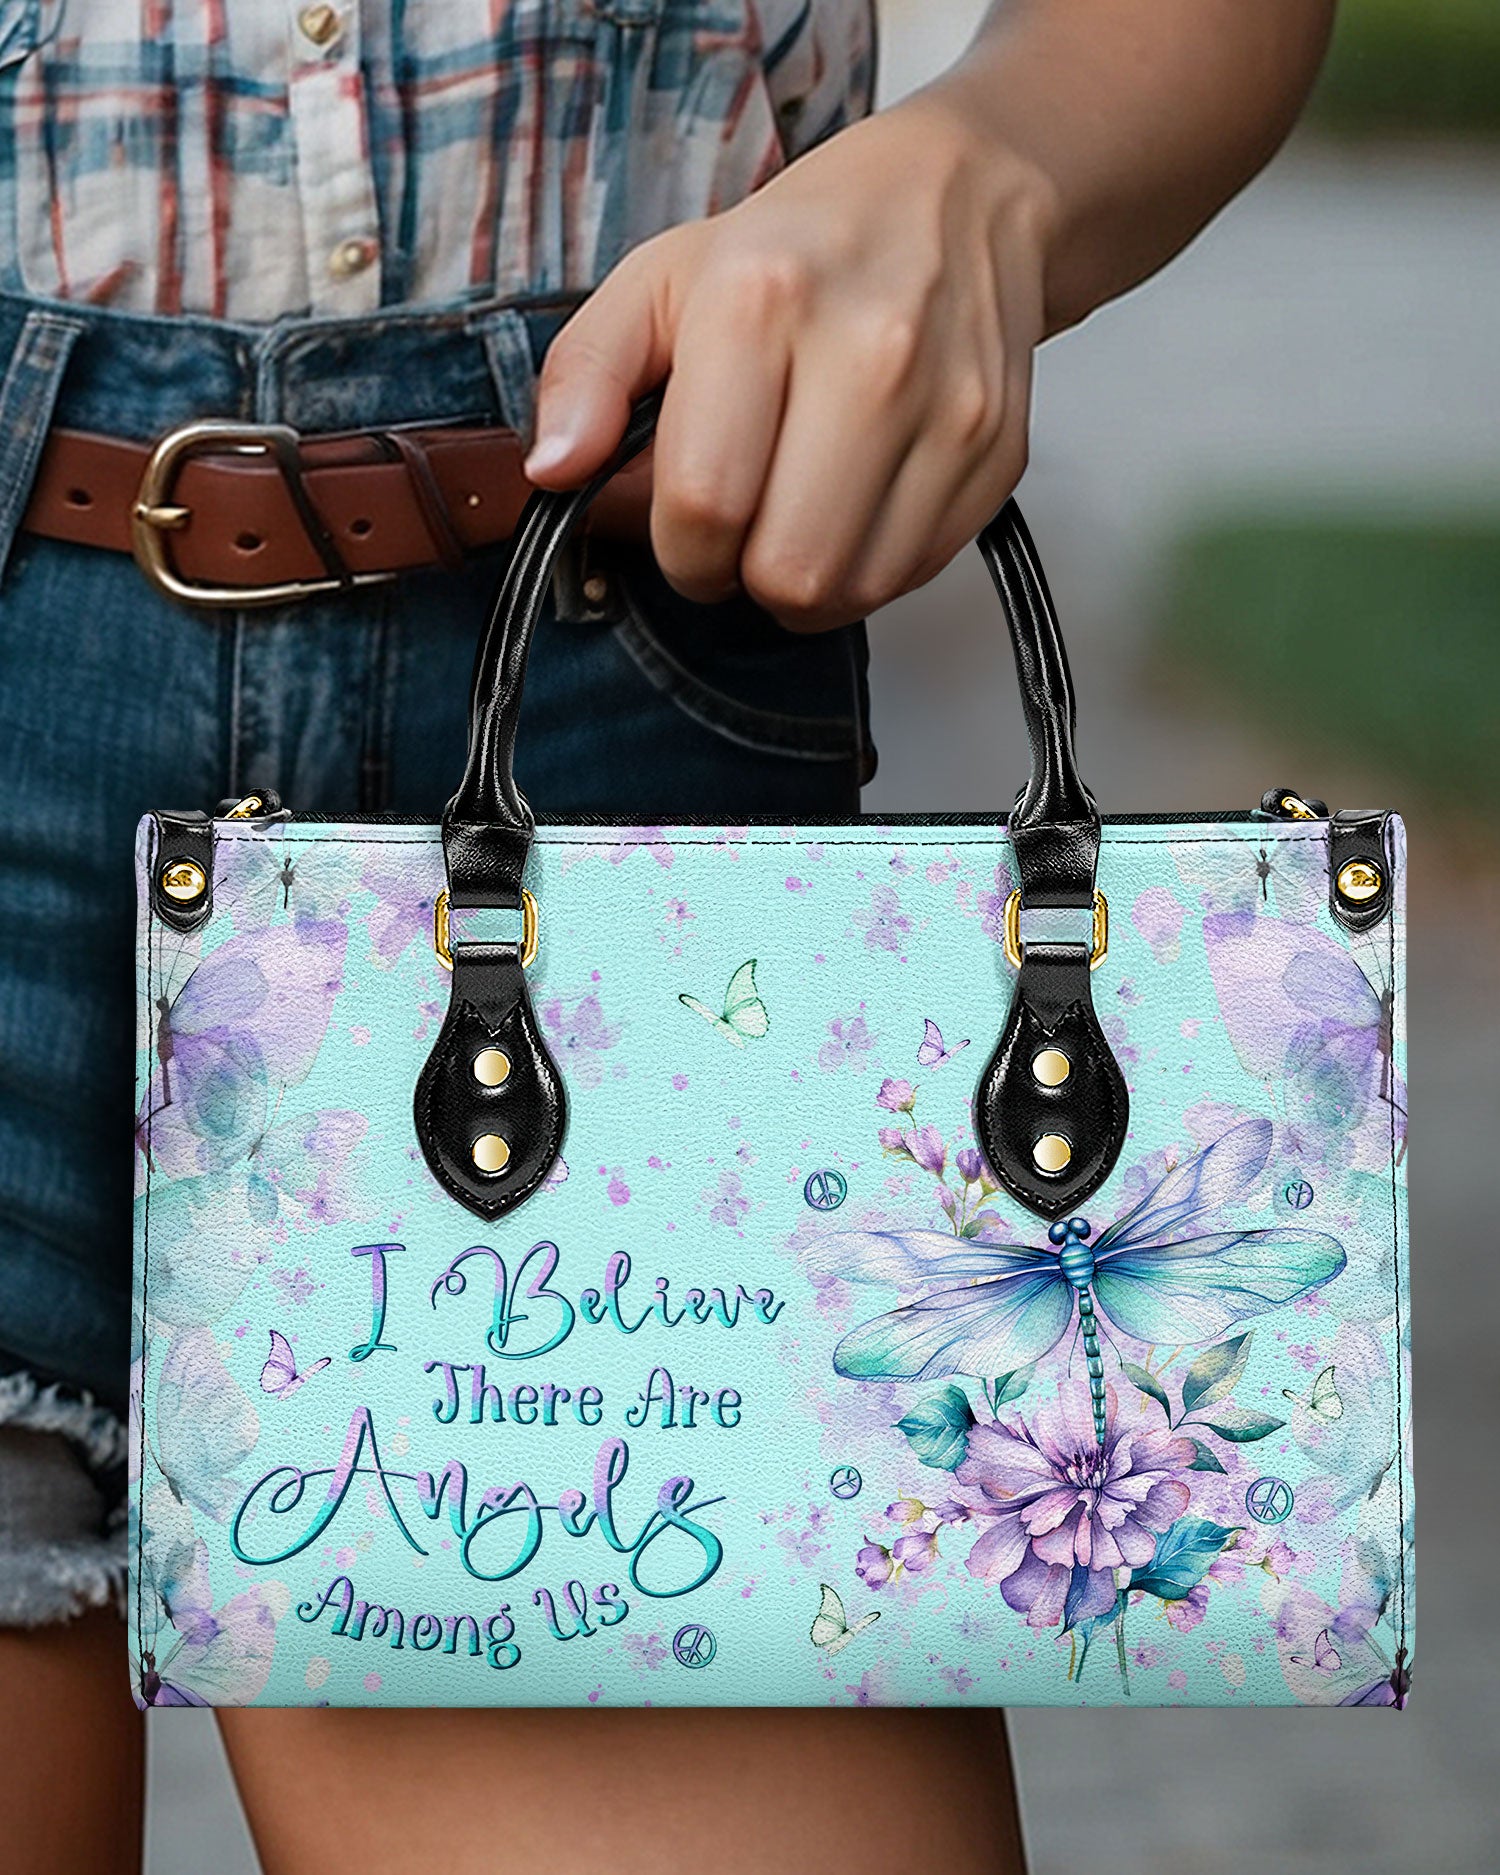 I BELIEVE THERE ARE ANGELS AMONG US LEATHER HANDBAG - YHLN2603243